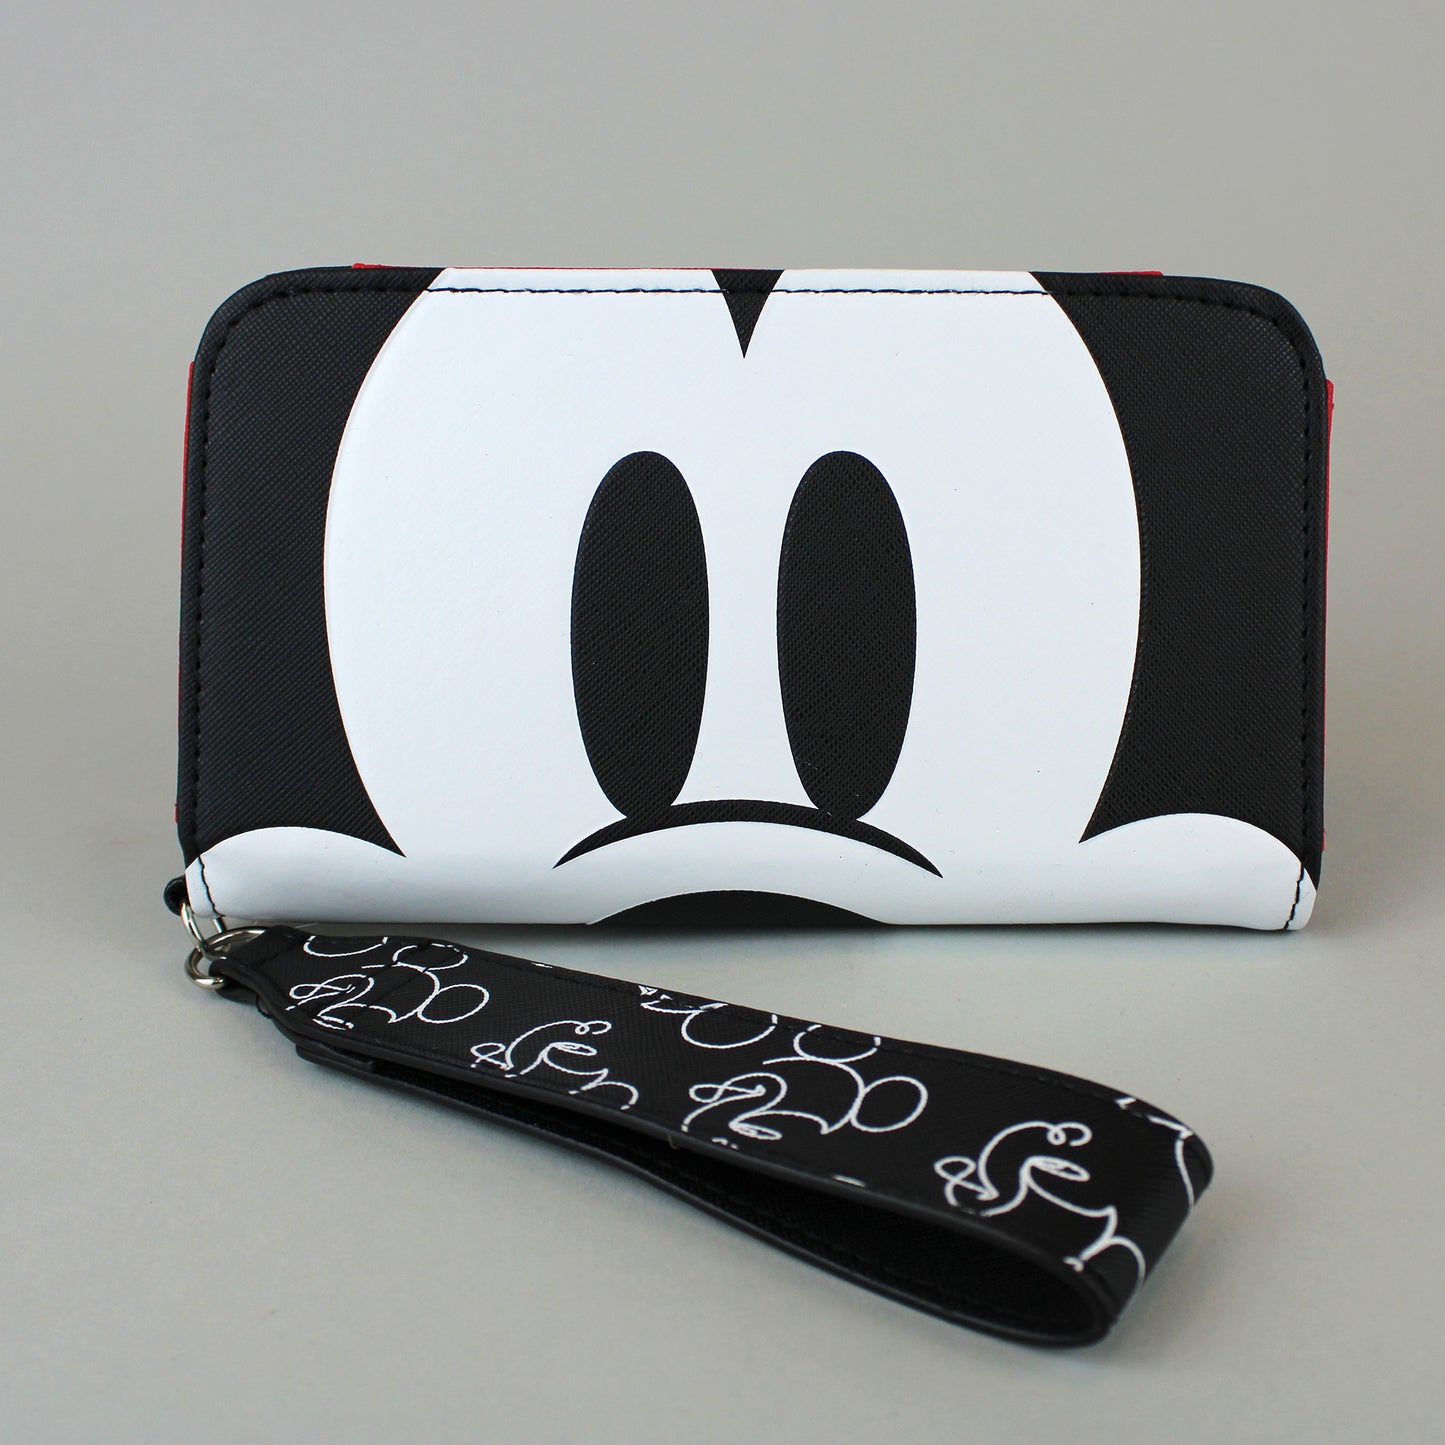 Disney X Coach Small Zip Around Wallet With Mickey Mouse And